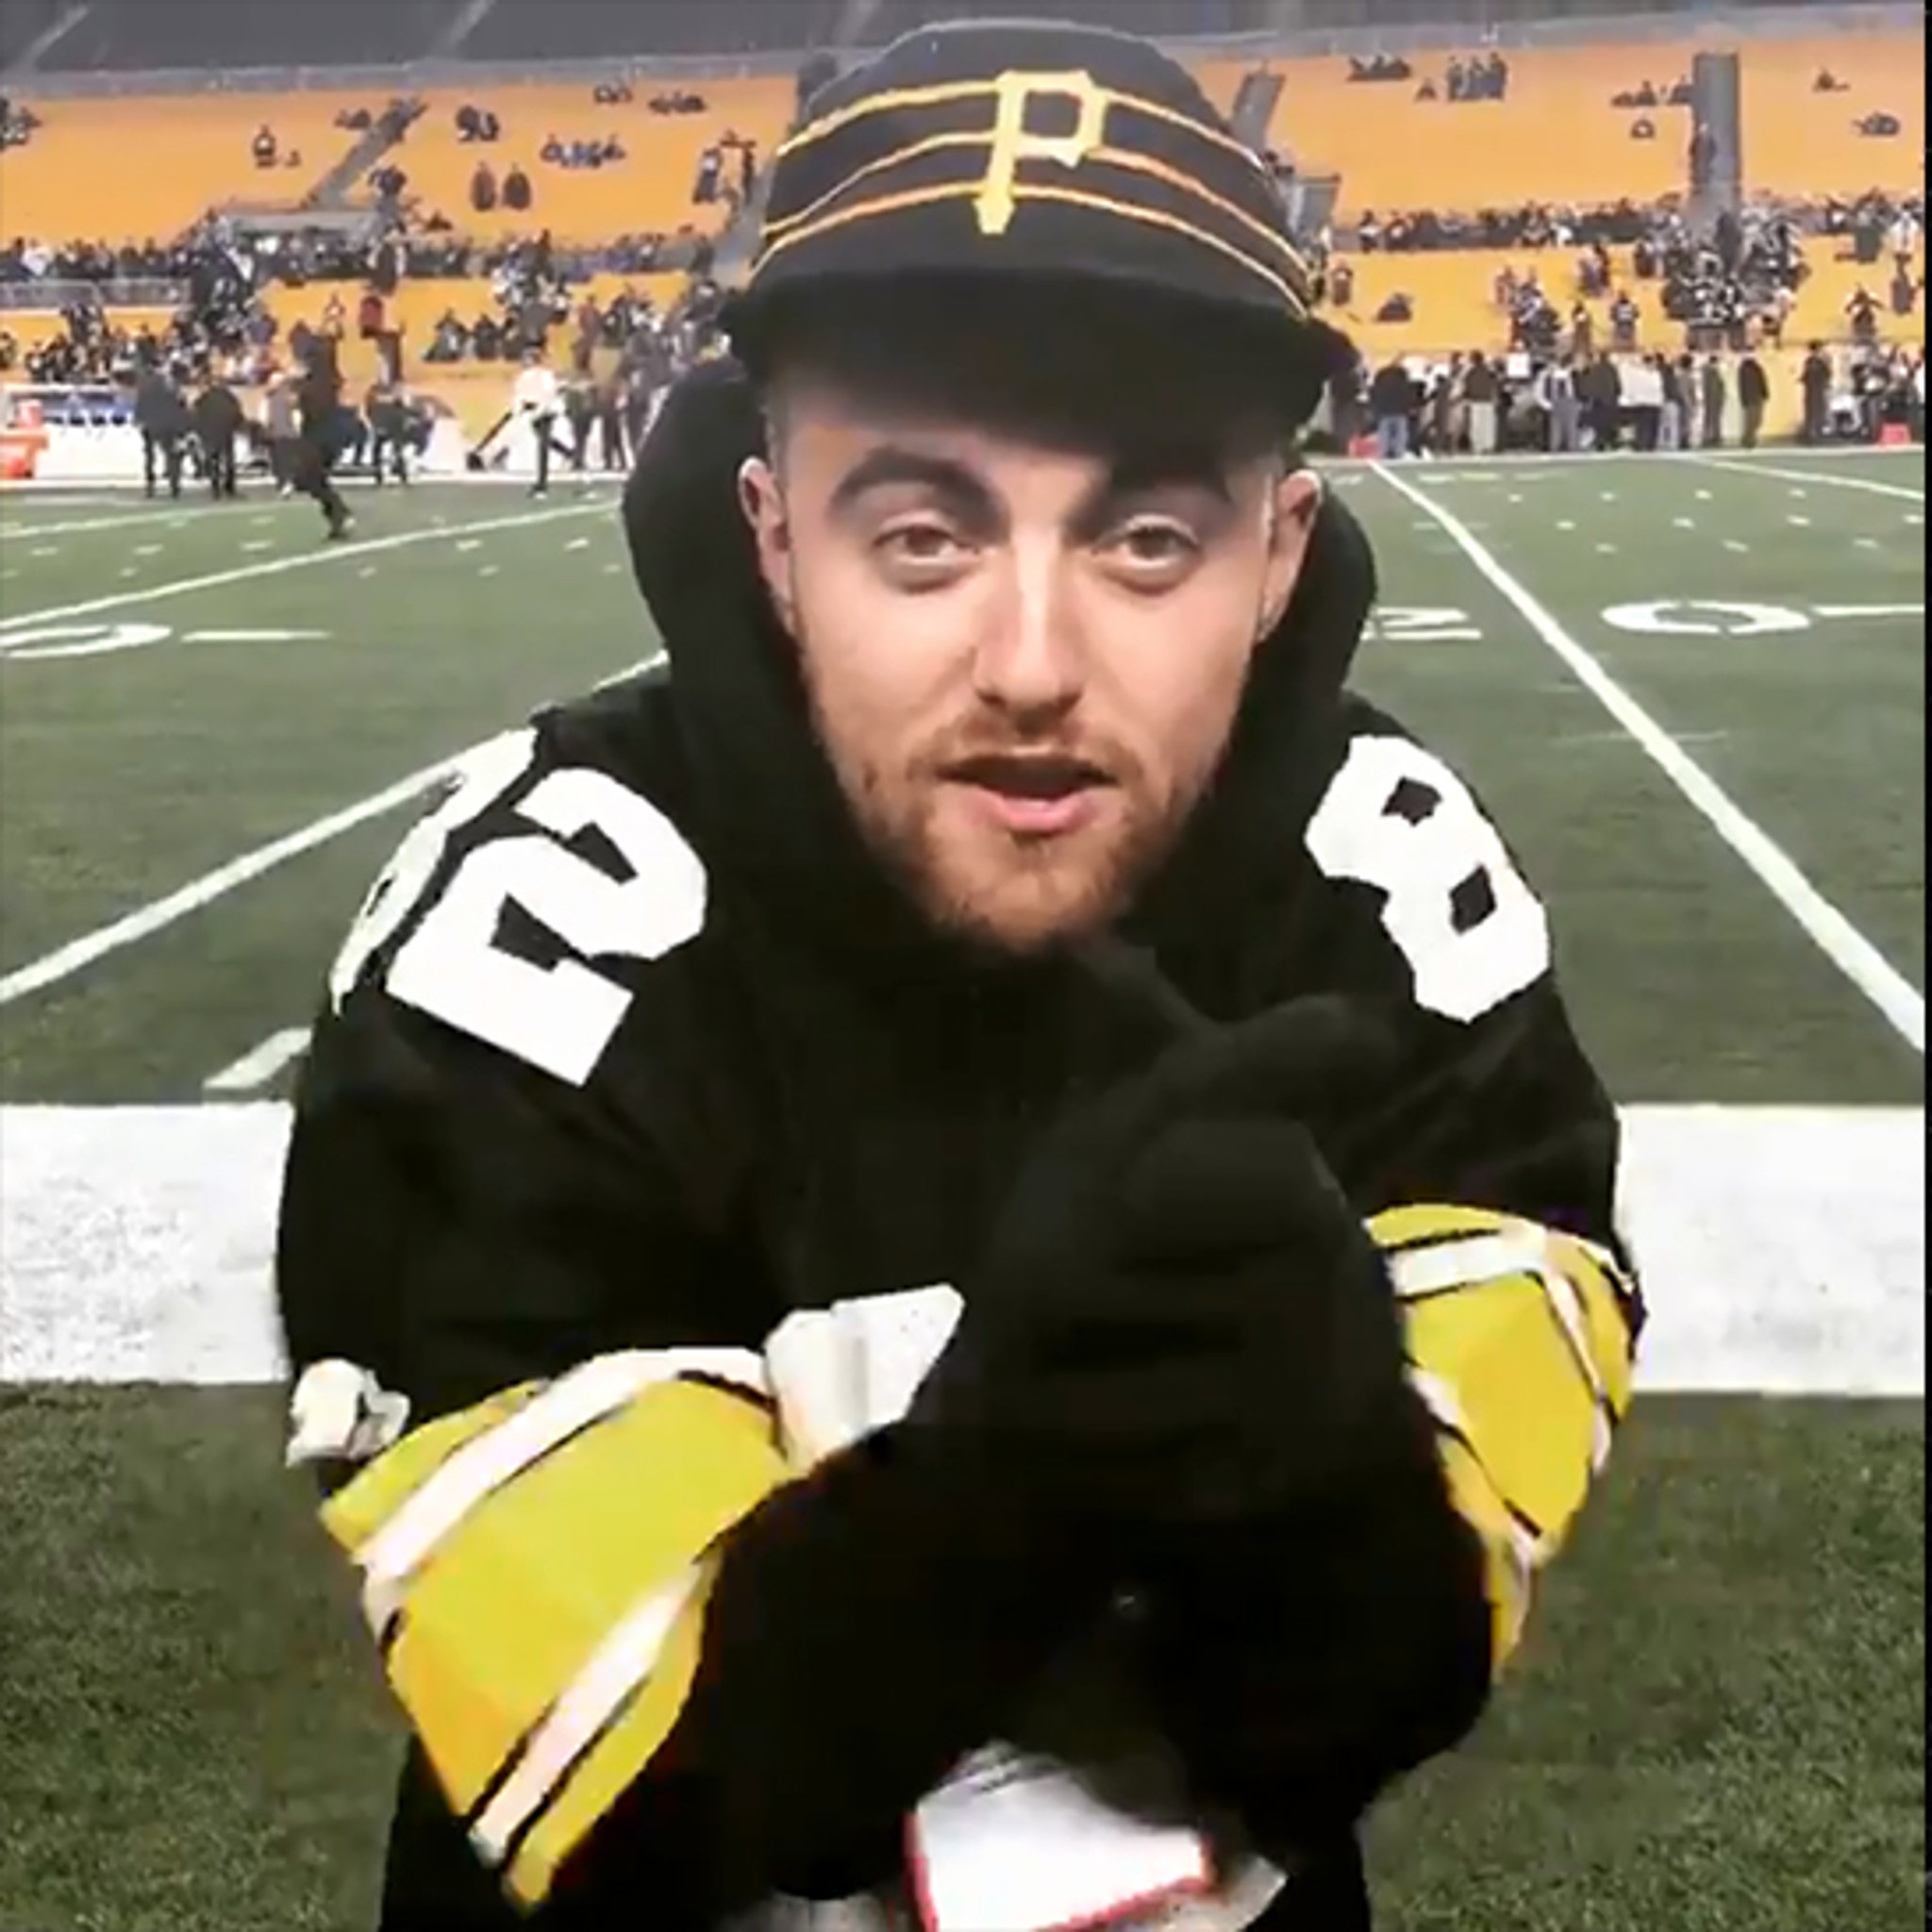 Remember that time Mac Miller led - Pittsburgh Steelers